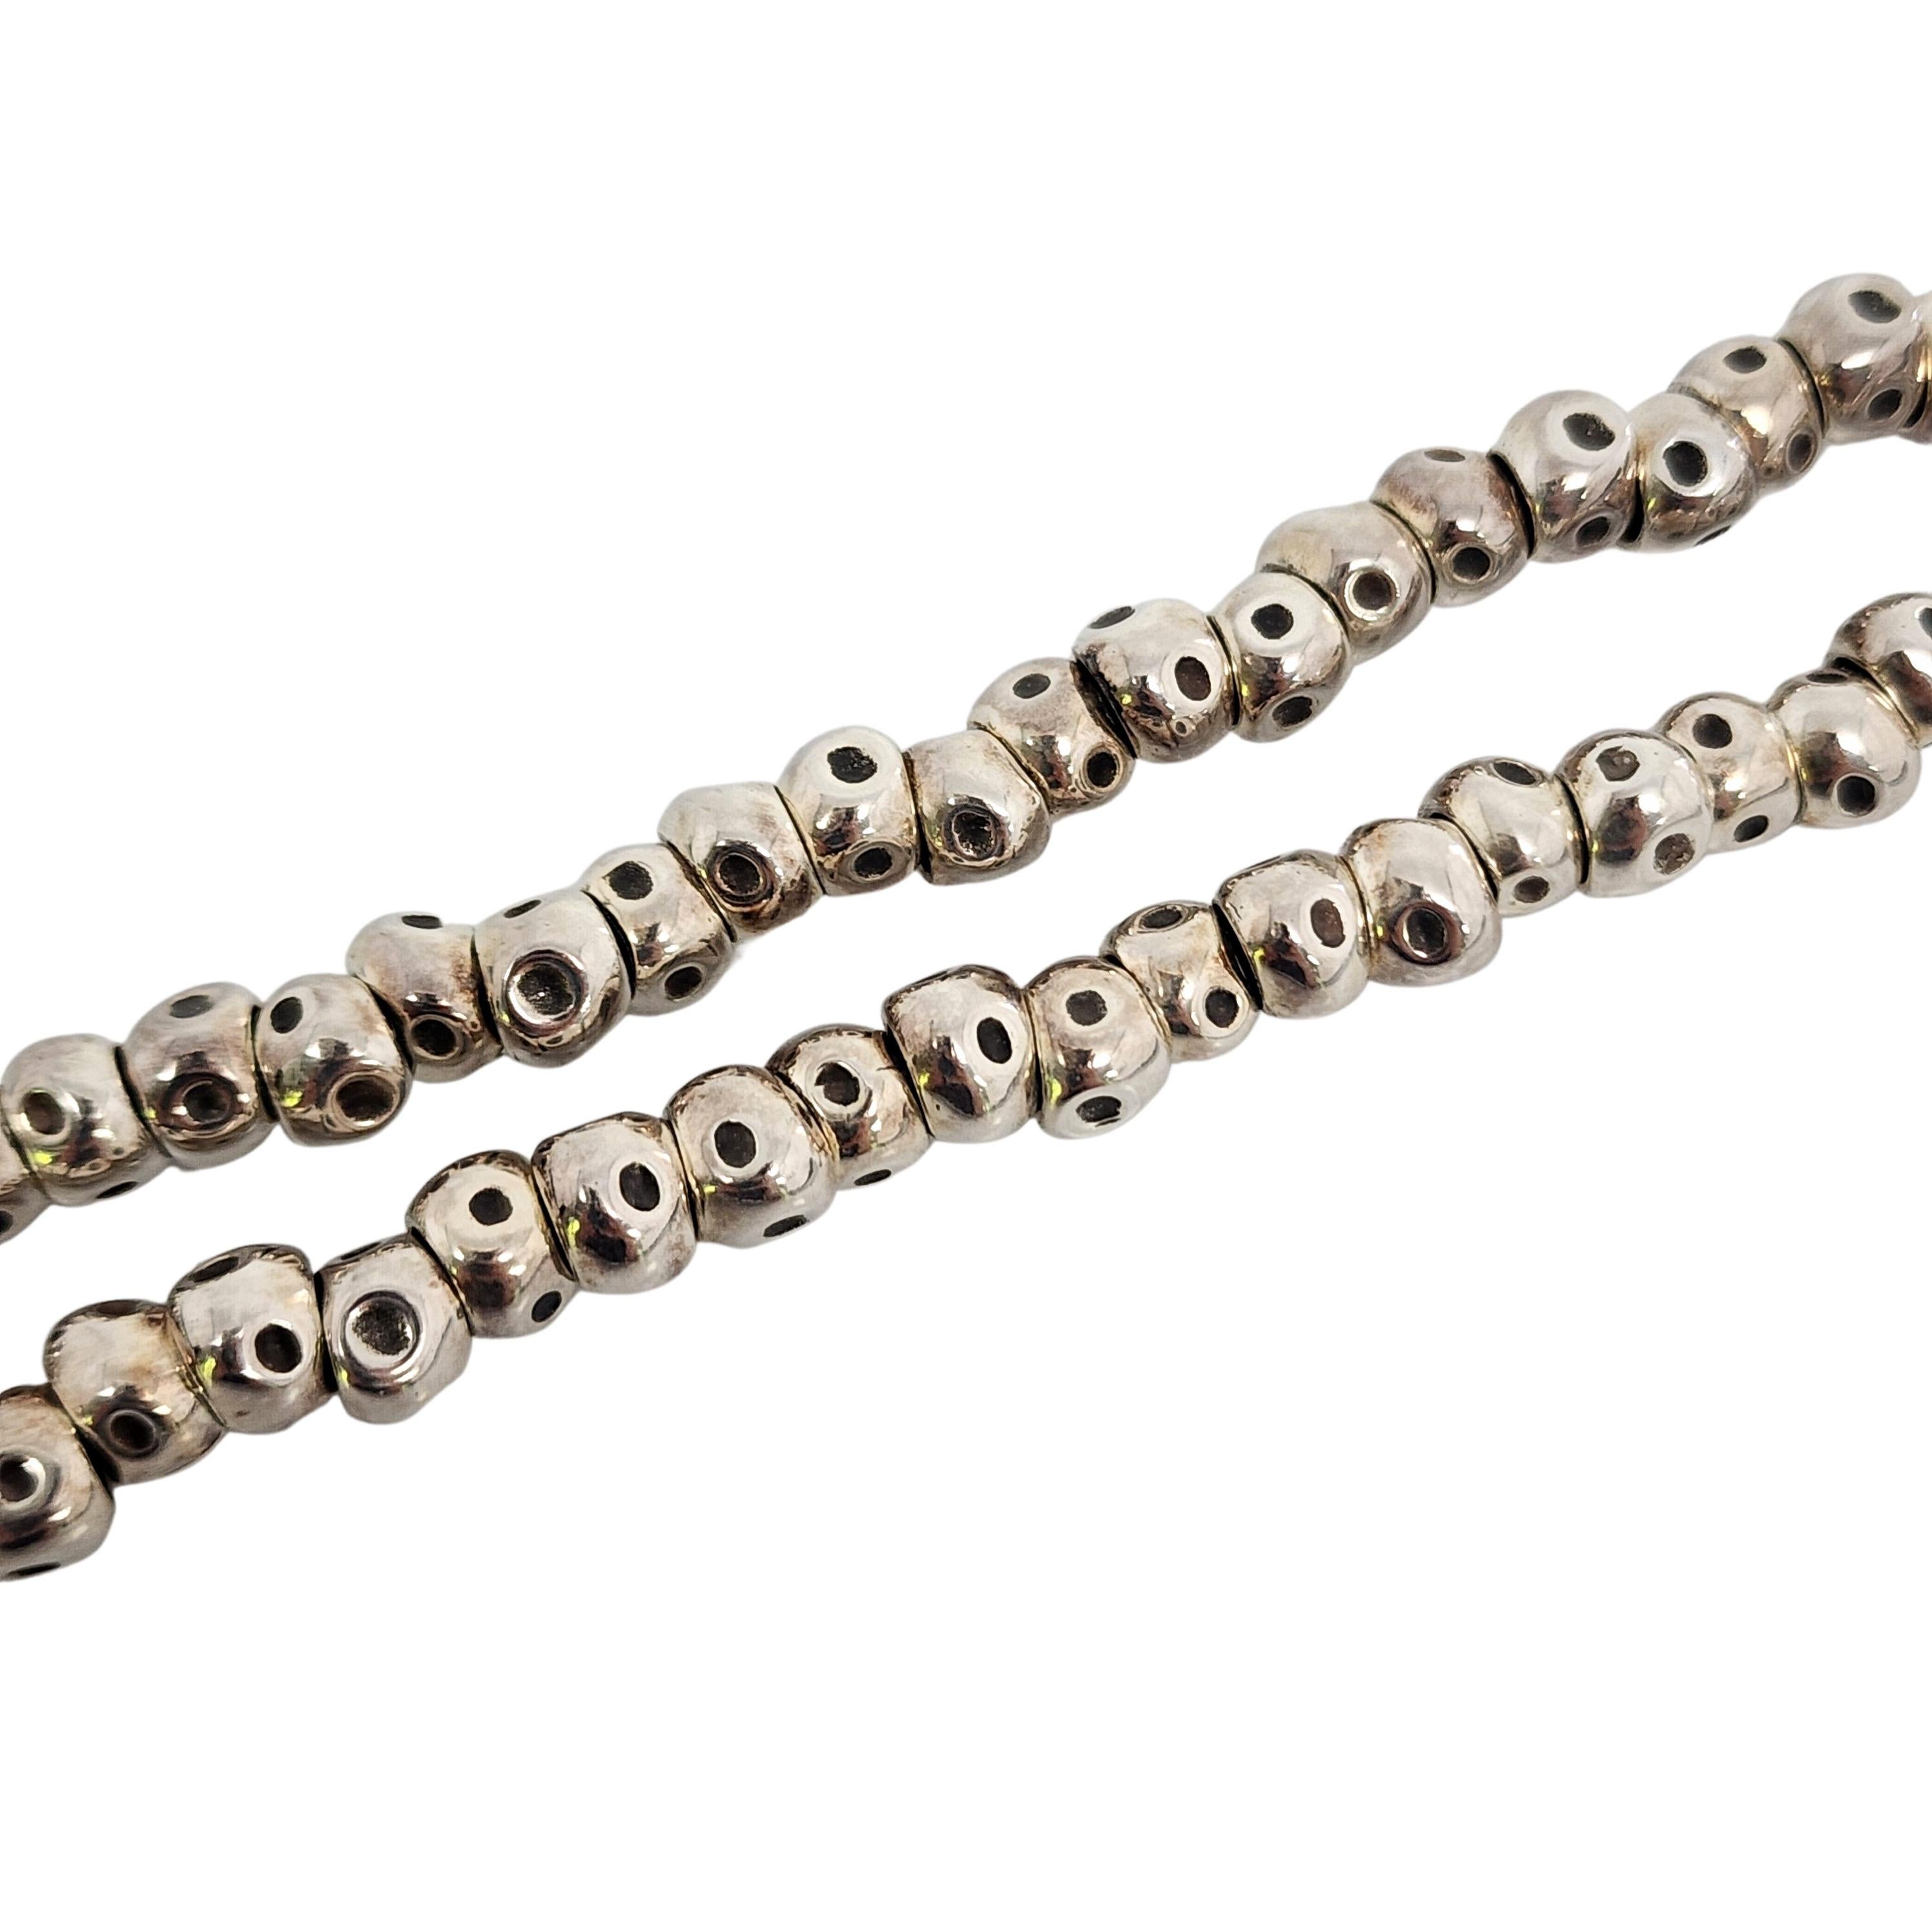 Uno de 50 All Balls Silver Plated Necklace #12790 For Sale 3